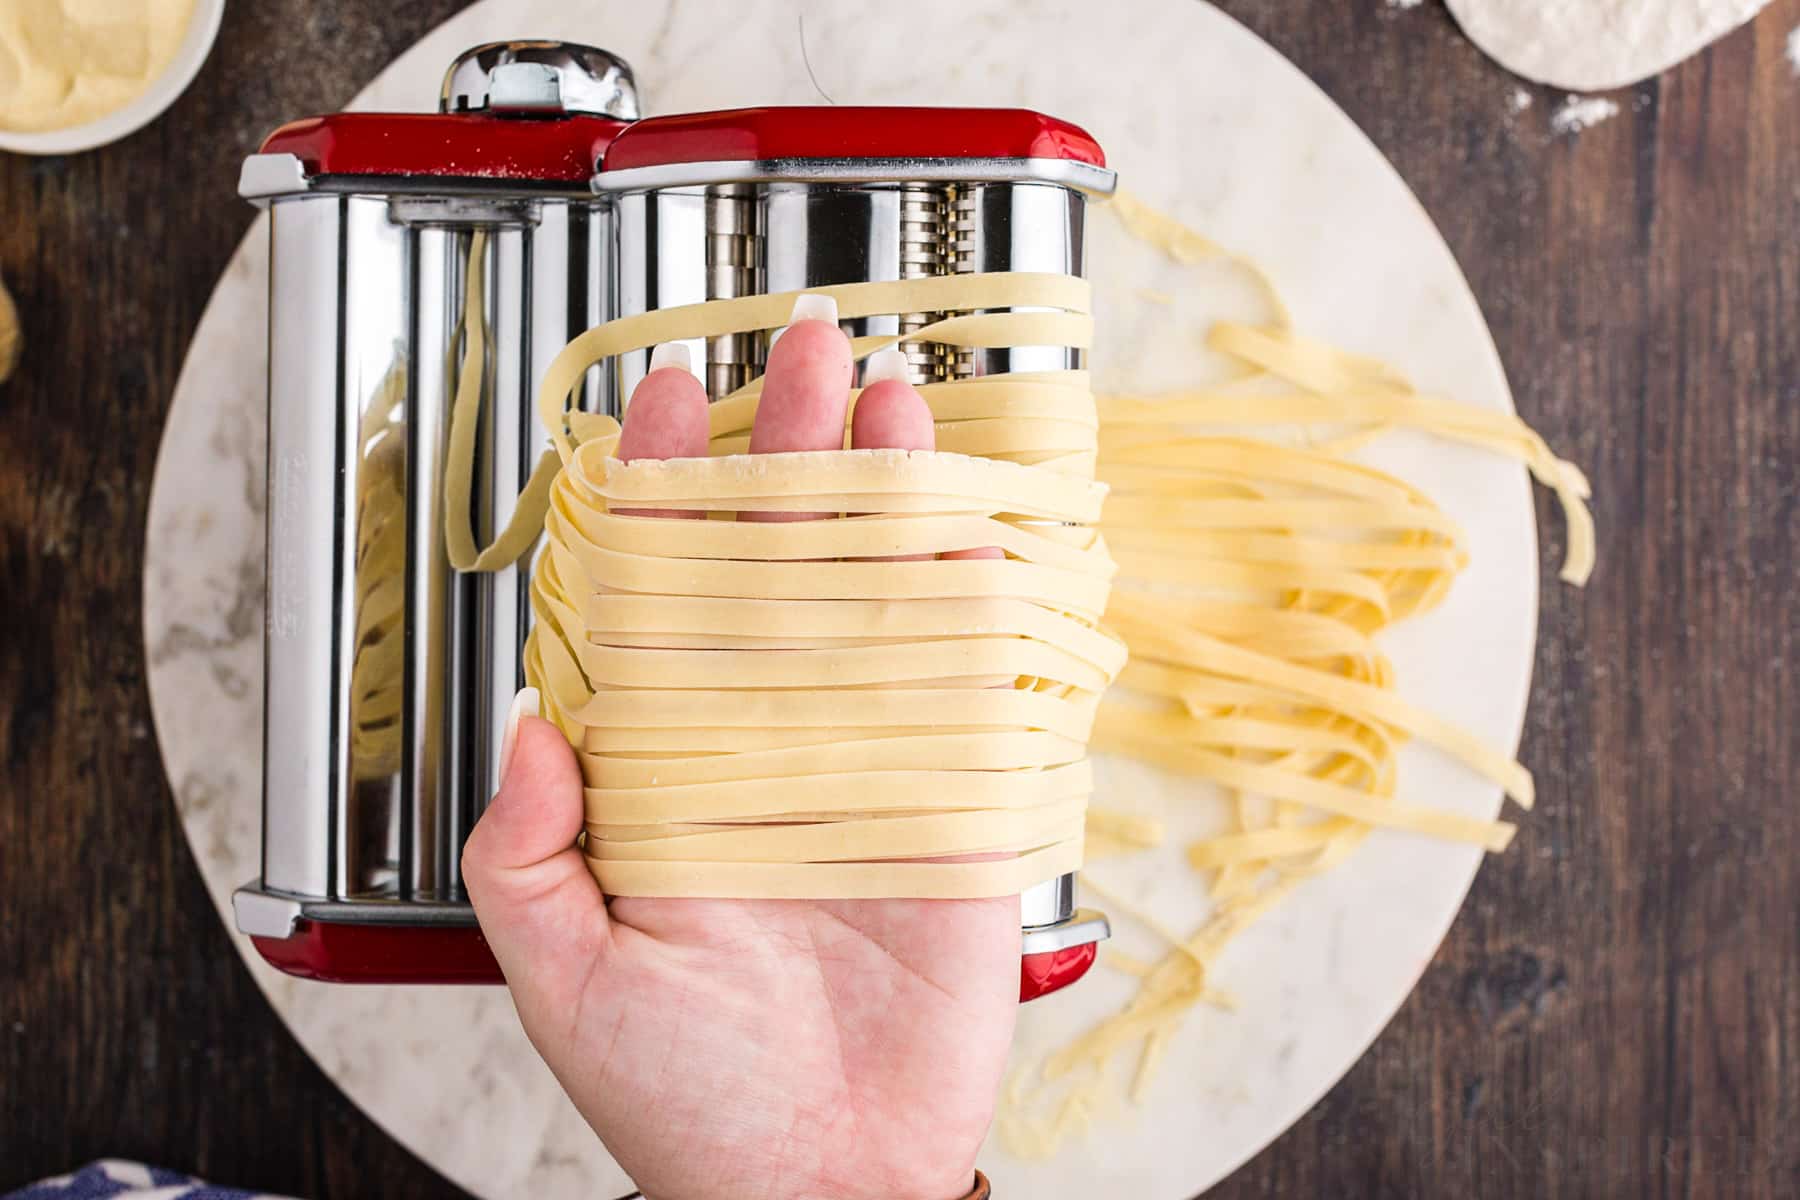 Hand holding thin fettucine pasta strips over a pasta machine on a marble board, bowl of semolina, flour, on a wooden kitchen countertop.